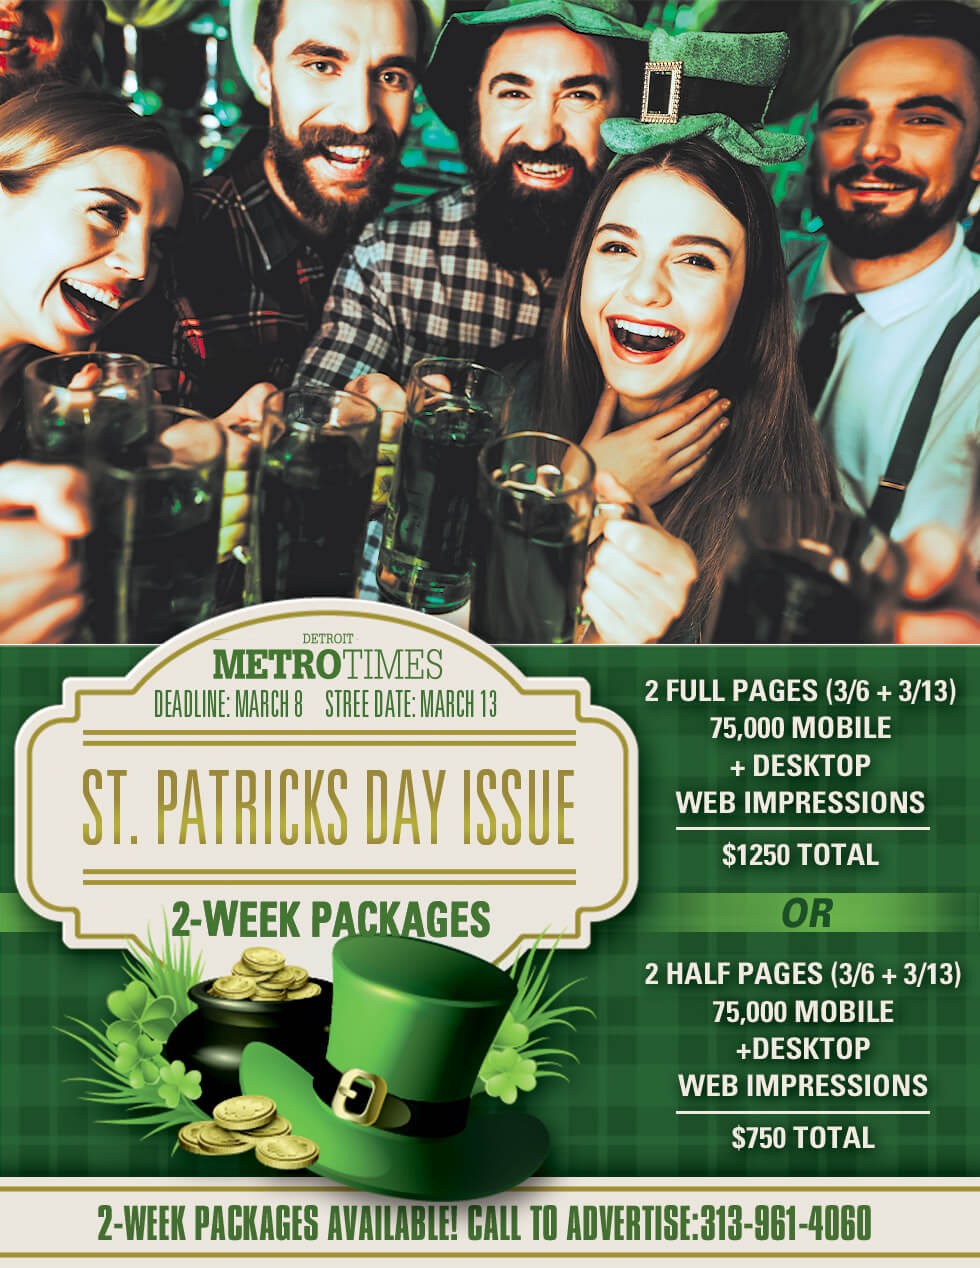 St Patrick's Day Issue Advertising Info